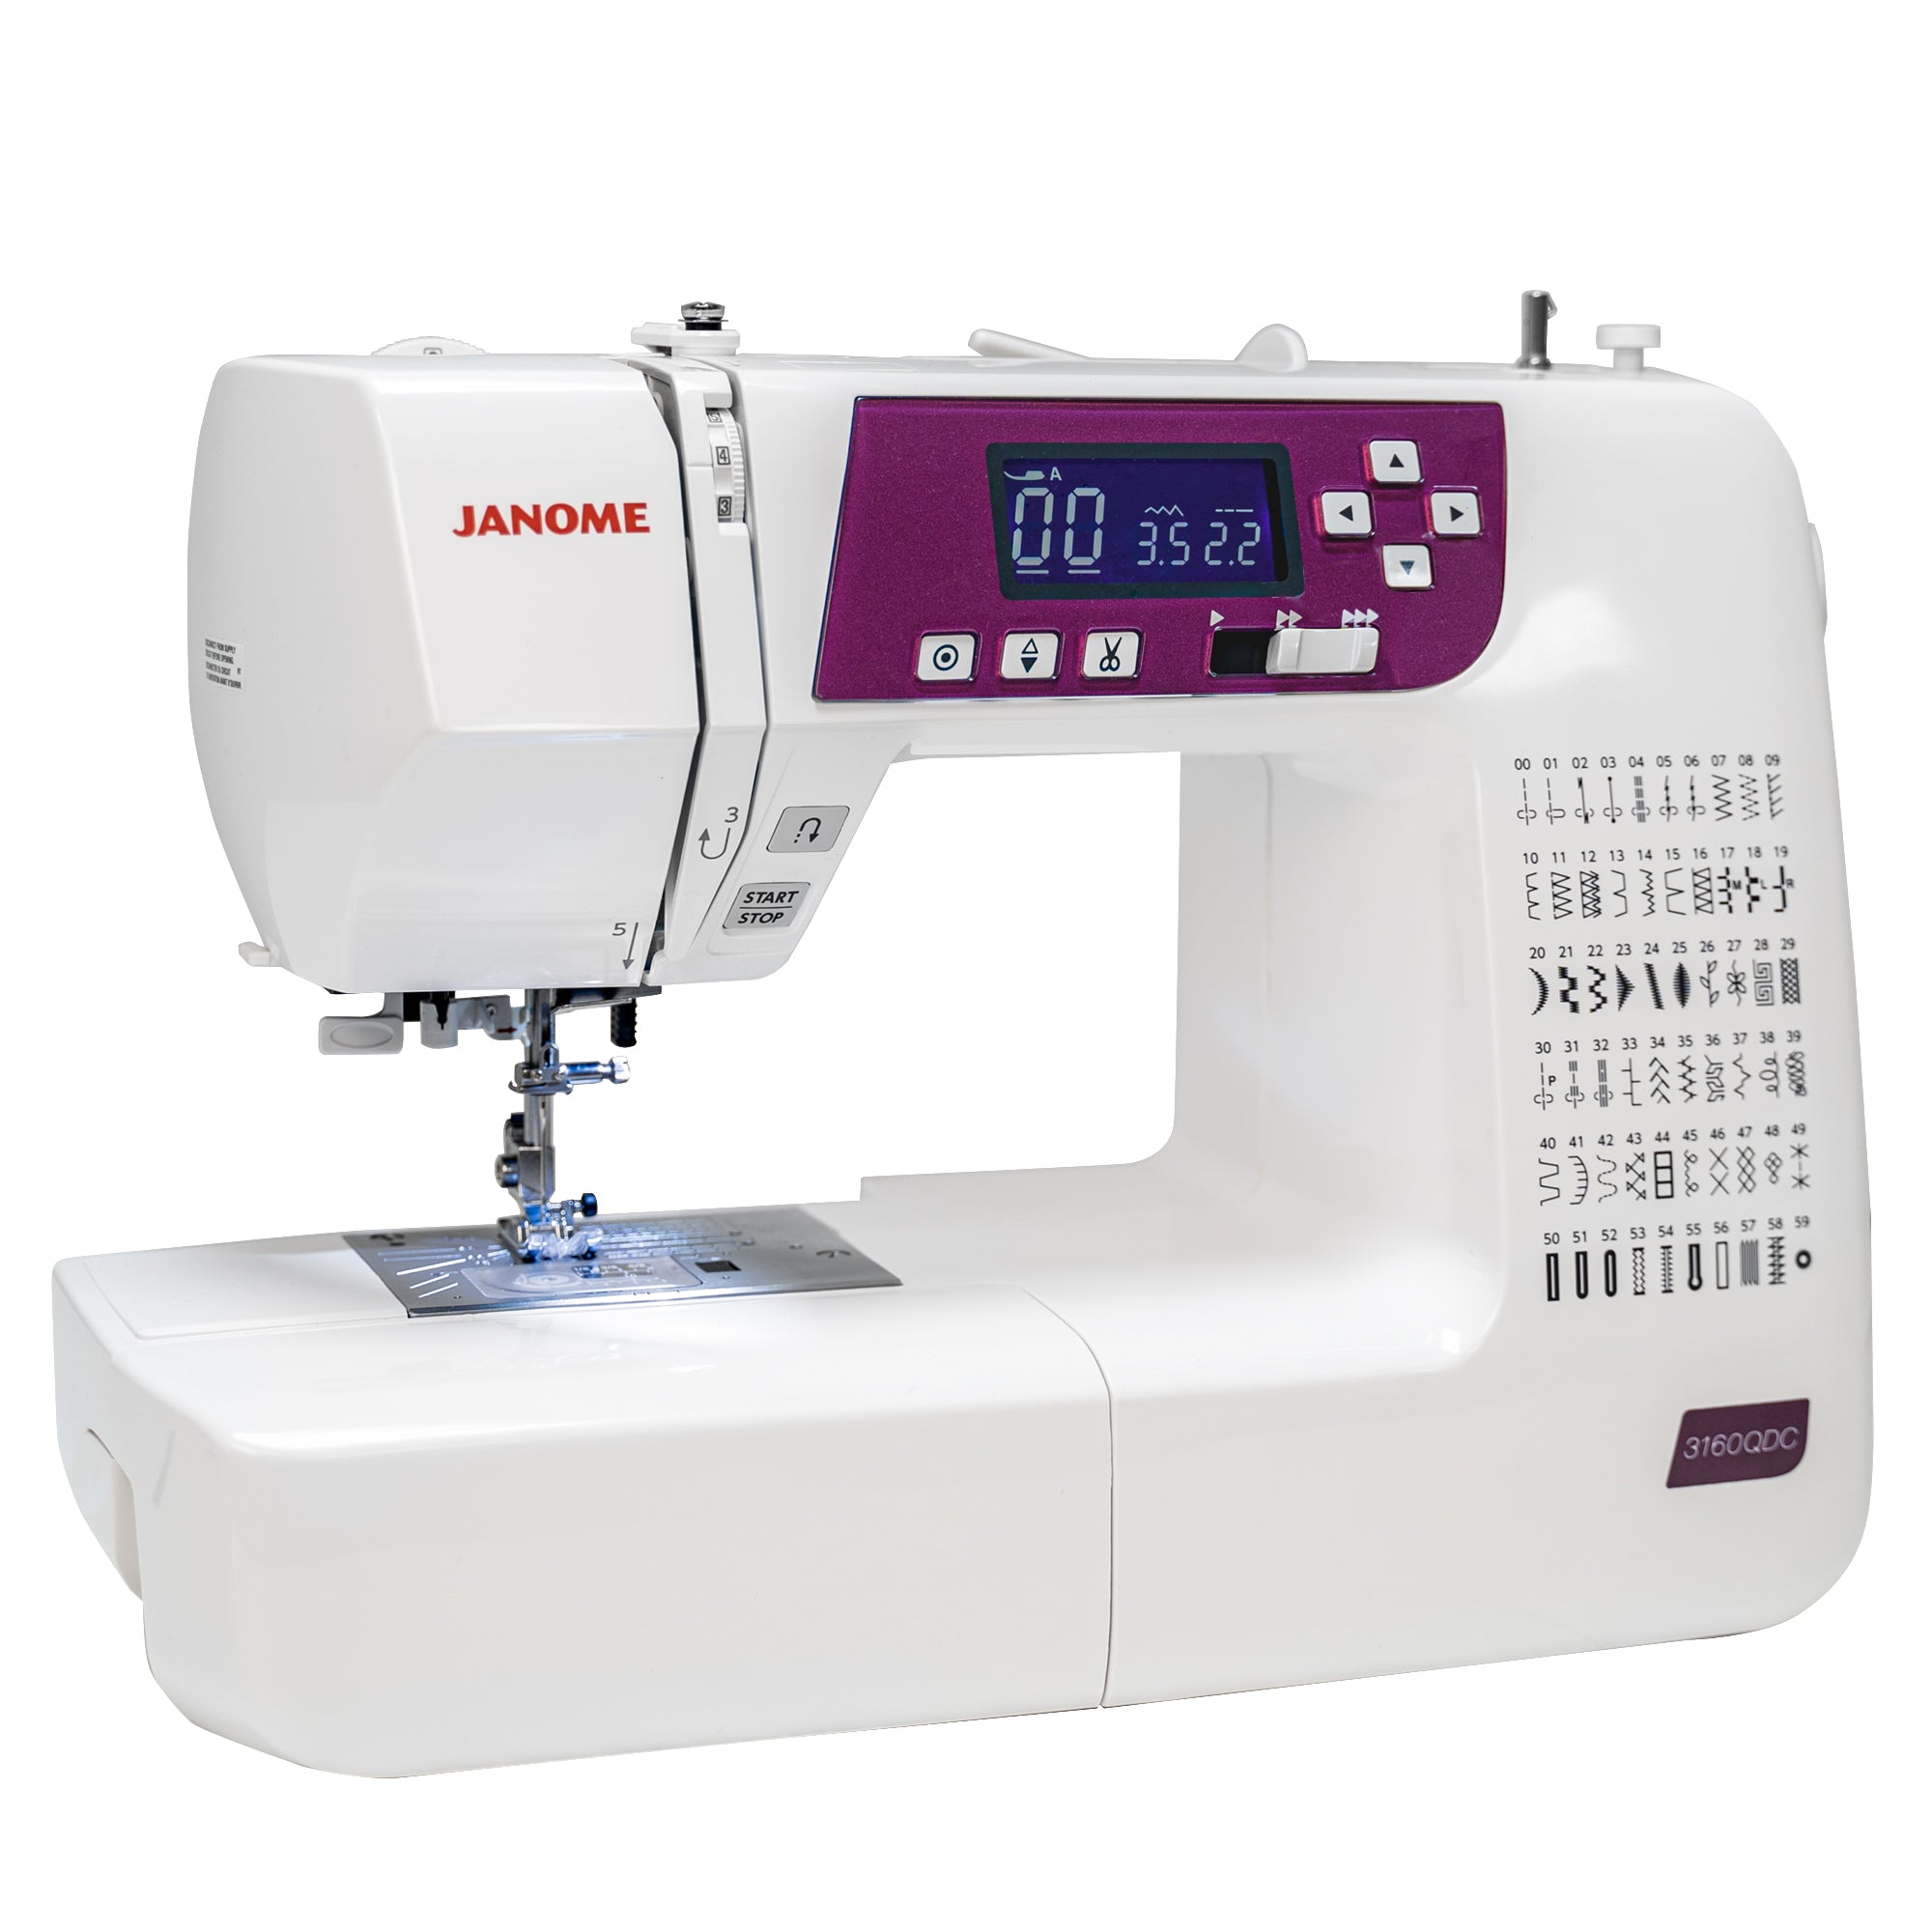 angled image of the Janome 3160QDC-G Sewing and Quilting Machine